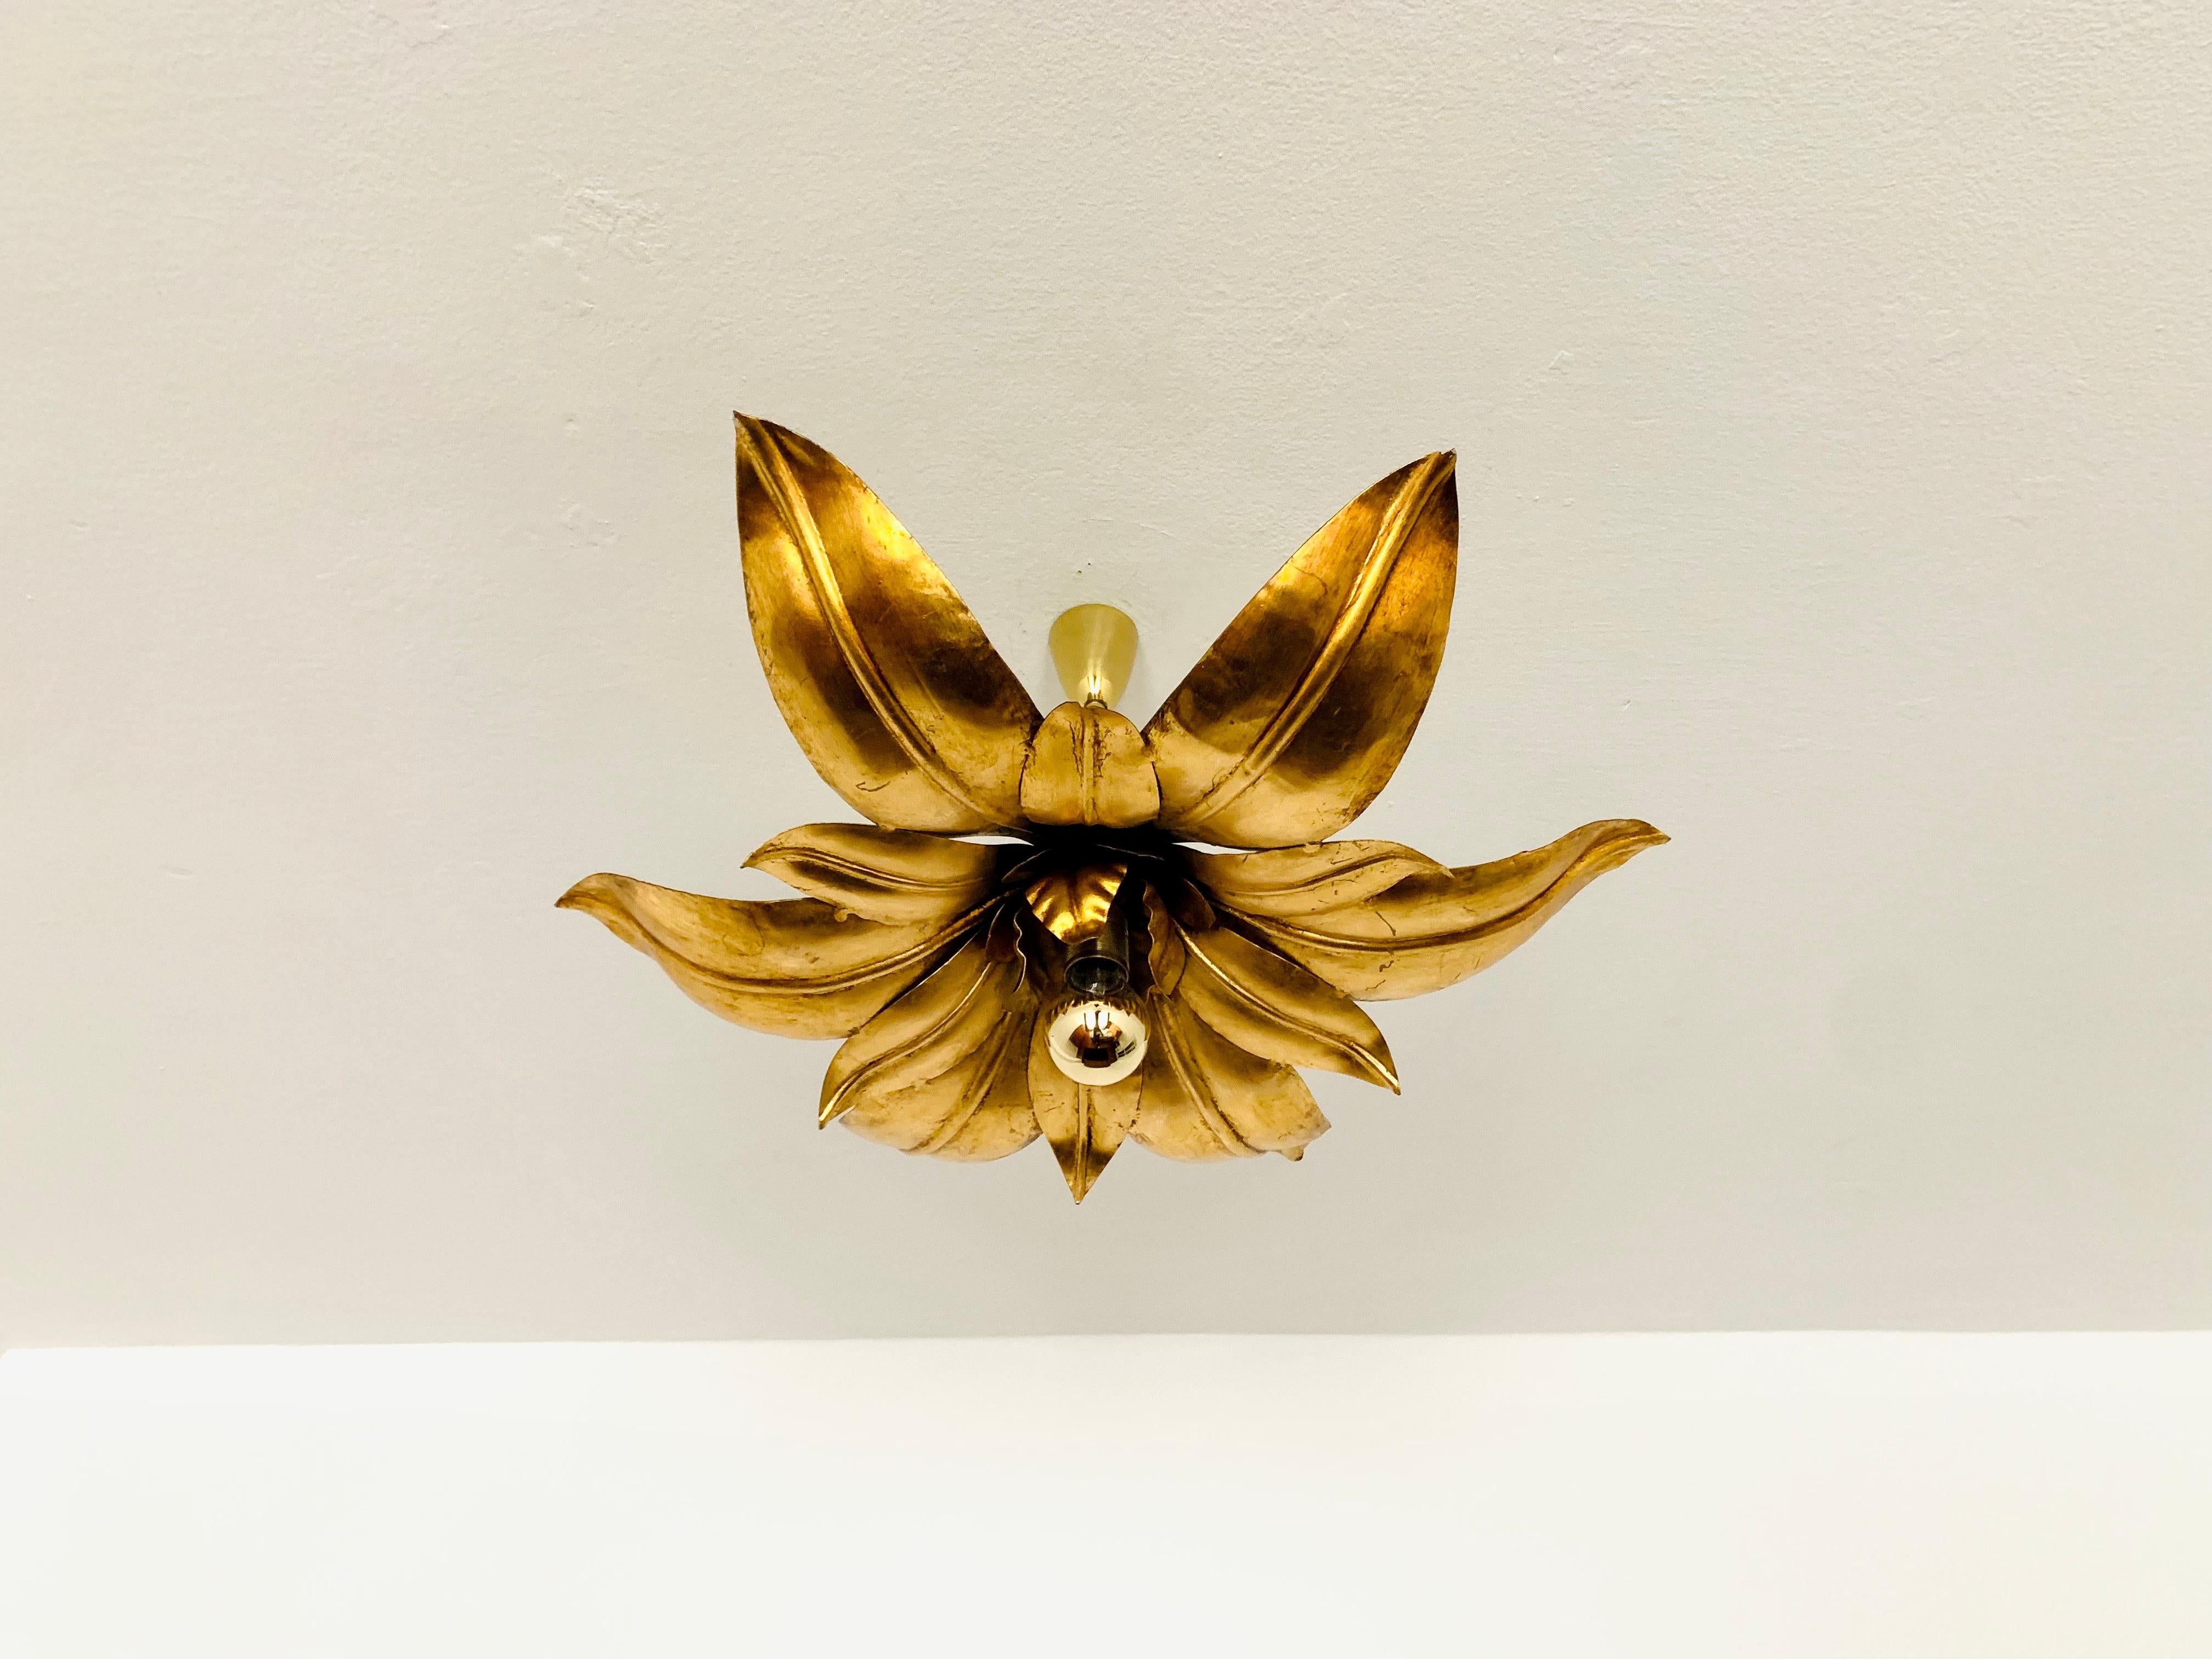 Exceptionally decorative ceiling lamp from the 1970s.
Great design and high-quality workmanship.
The golden leaves and the patterned glass create a very elegant light.

Condition:

Very good vintage condition with slight signs of age-related